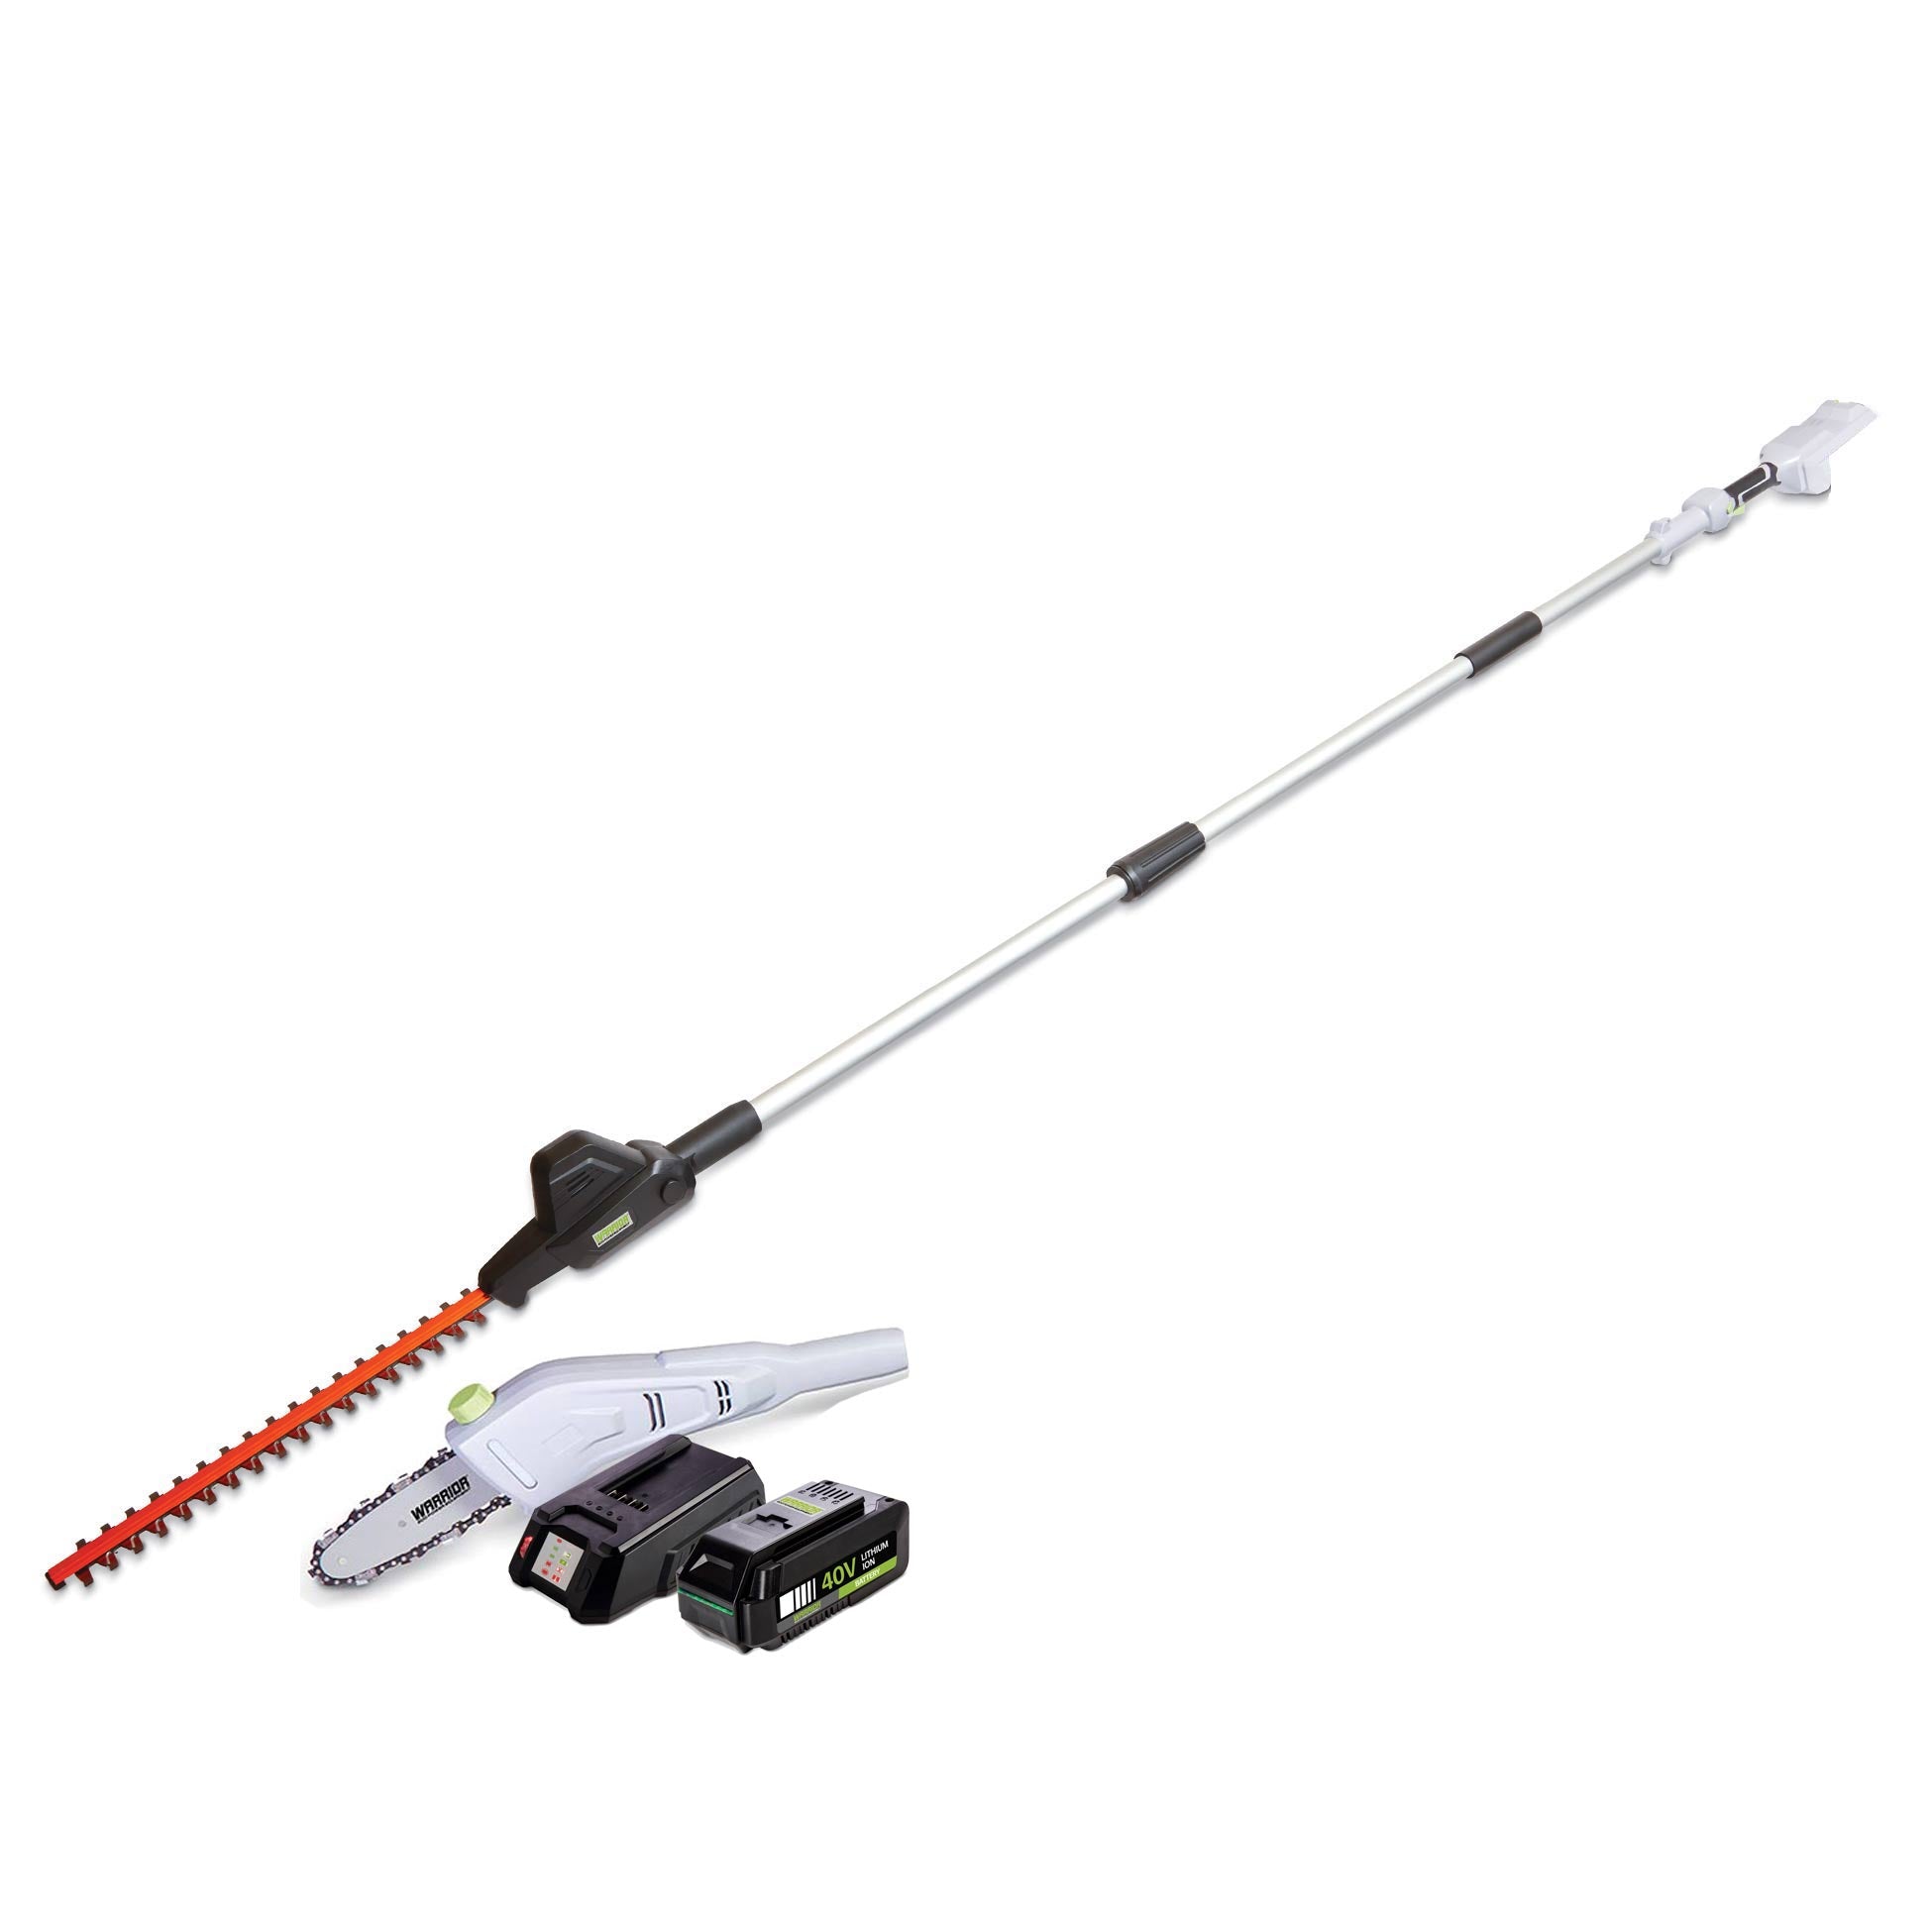 Warrior Eco Power Equipment 40v Cordless Pole Hedge Trimmer with chainsaw attachment and optional 40v battery and charger